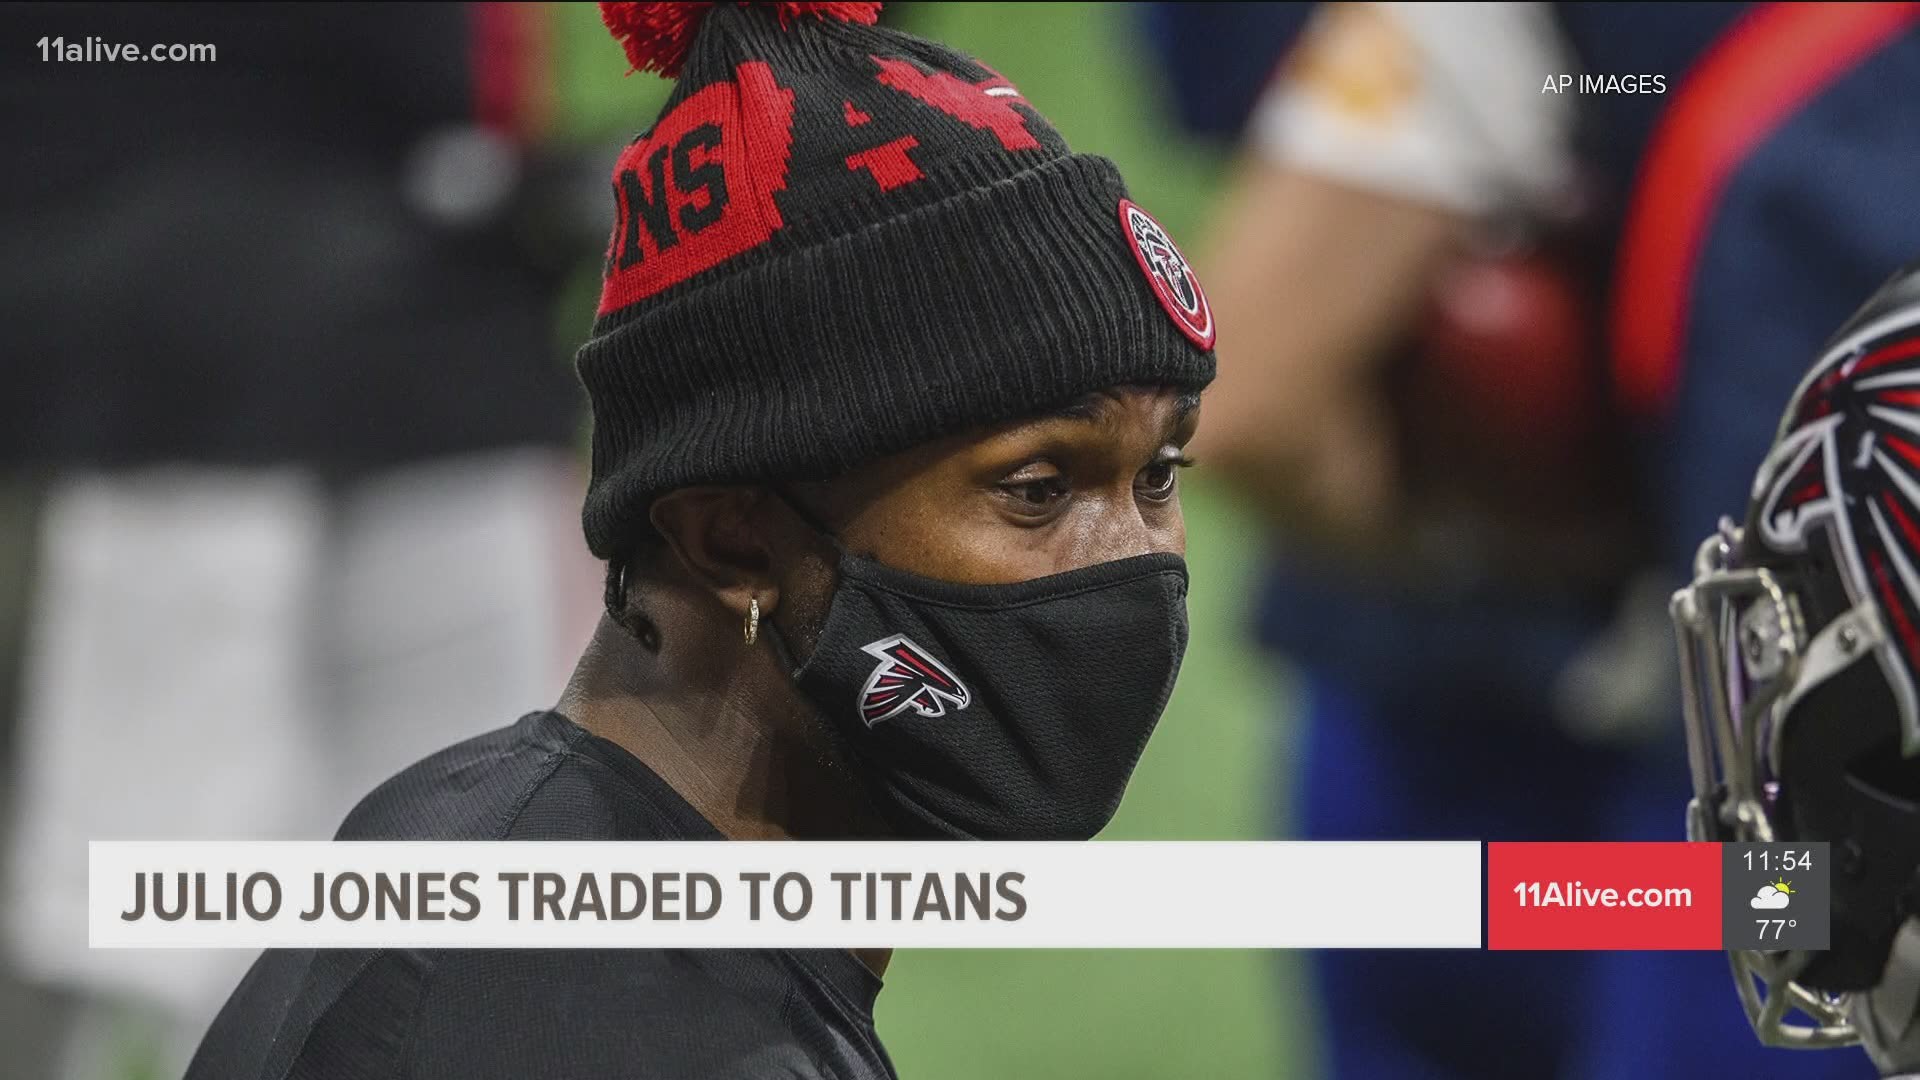 After saying on national television that he wasn't coming back to Atlanta, the Falcons announced they traded the former first-rounder to the Tennessee Titans.